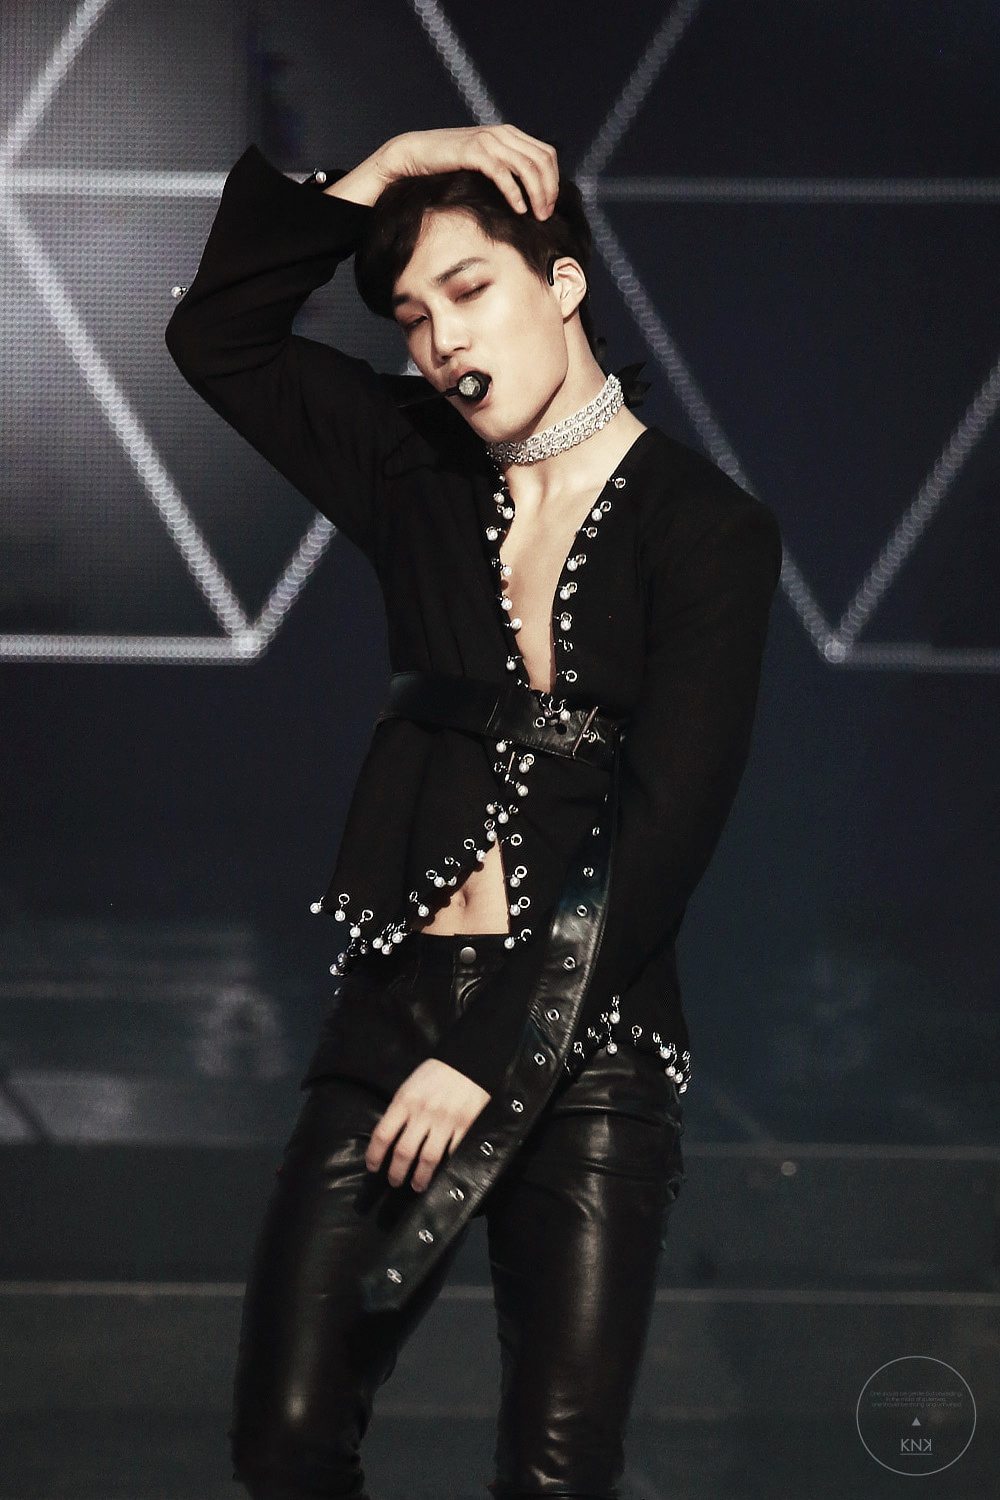 Kai seductively reveals his toned chest as he dances in his embellished suit and diamond choker.